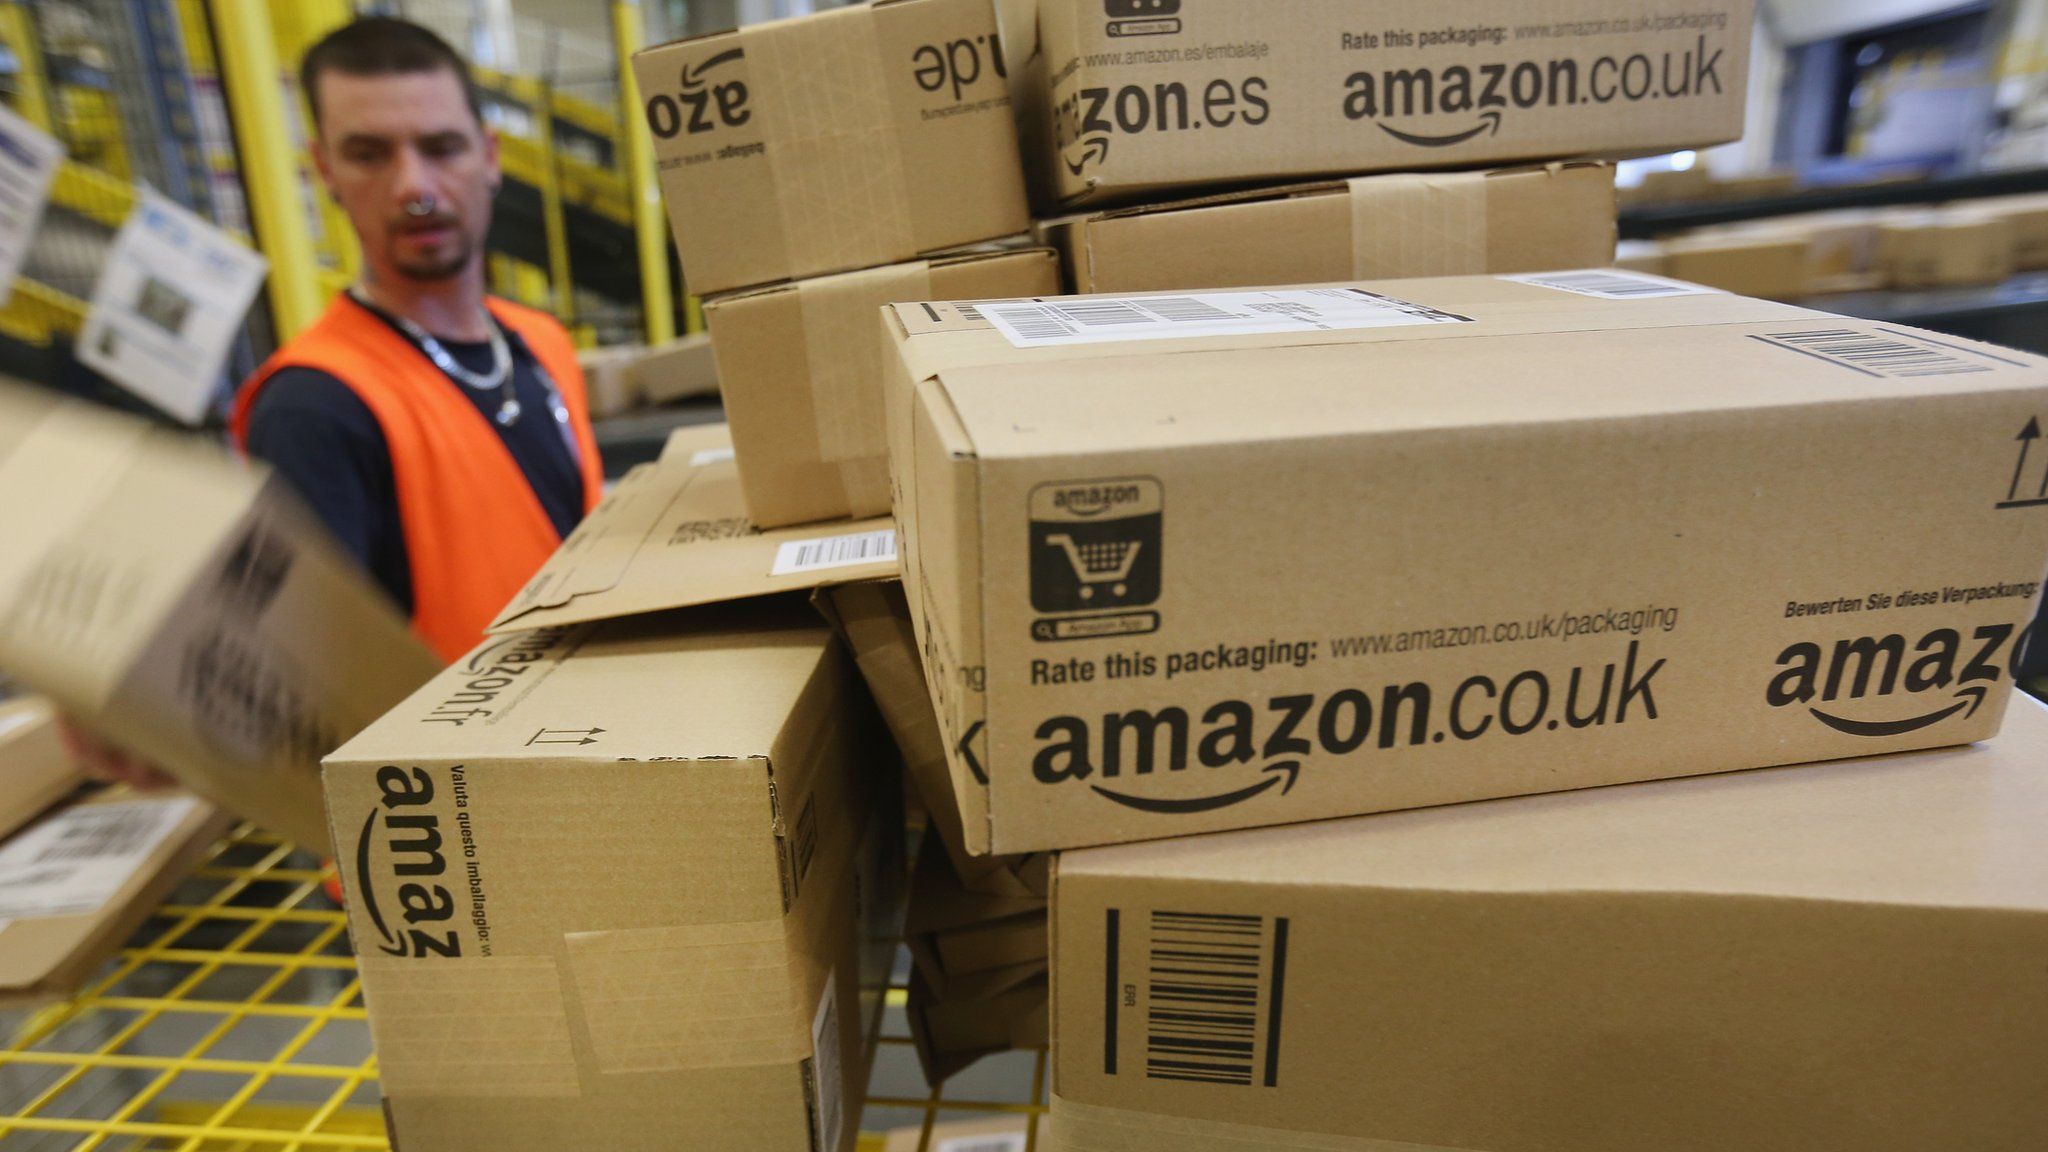 Amazon branded cardboard boxes being handled in one of the online retailers warehouses